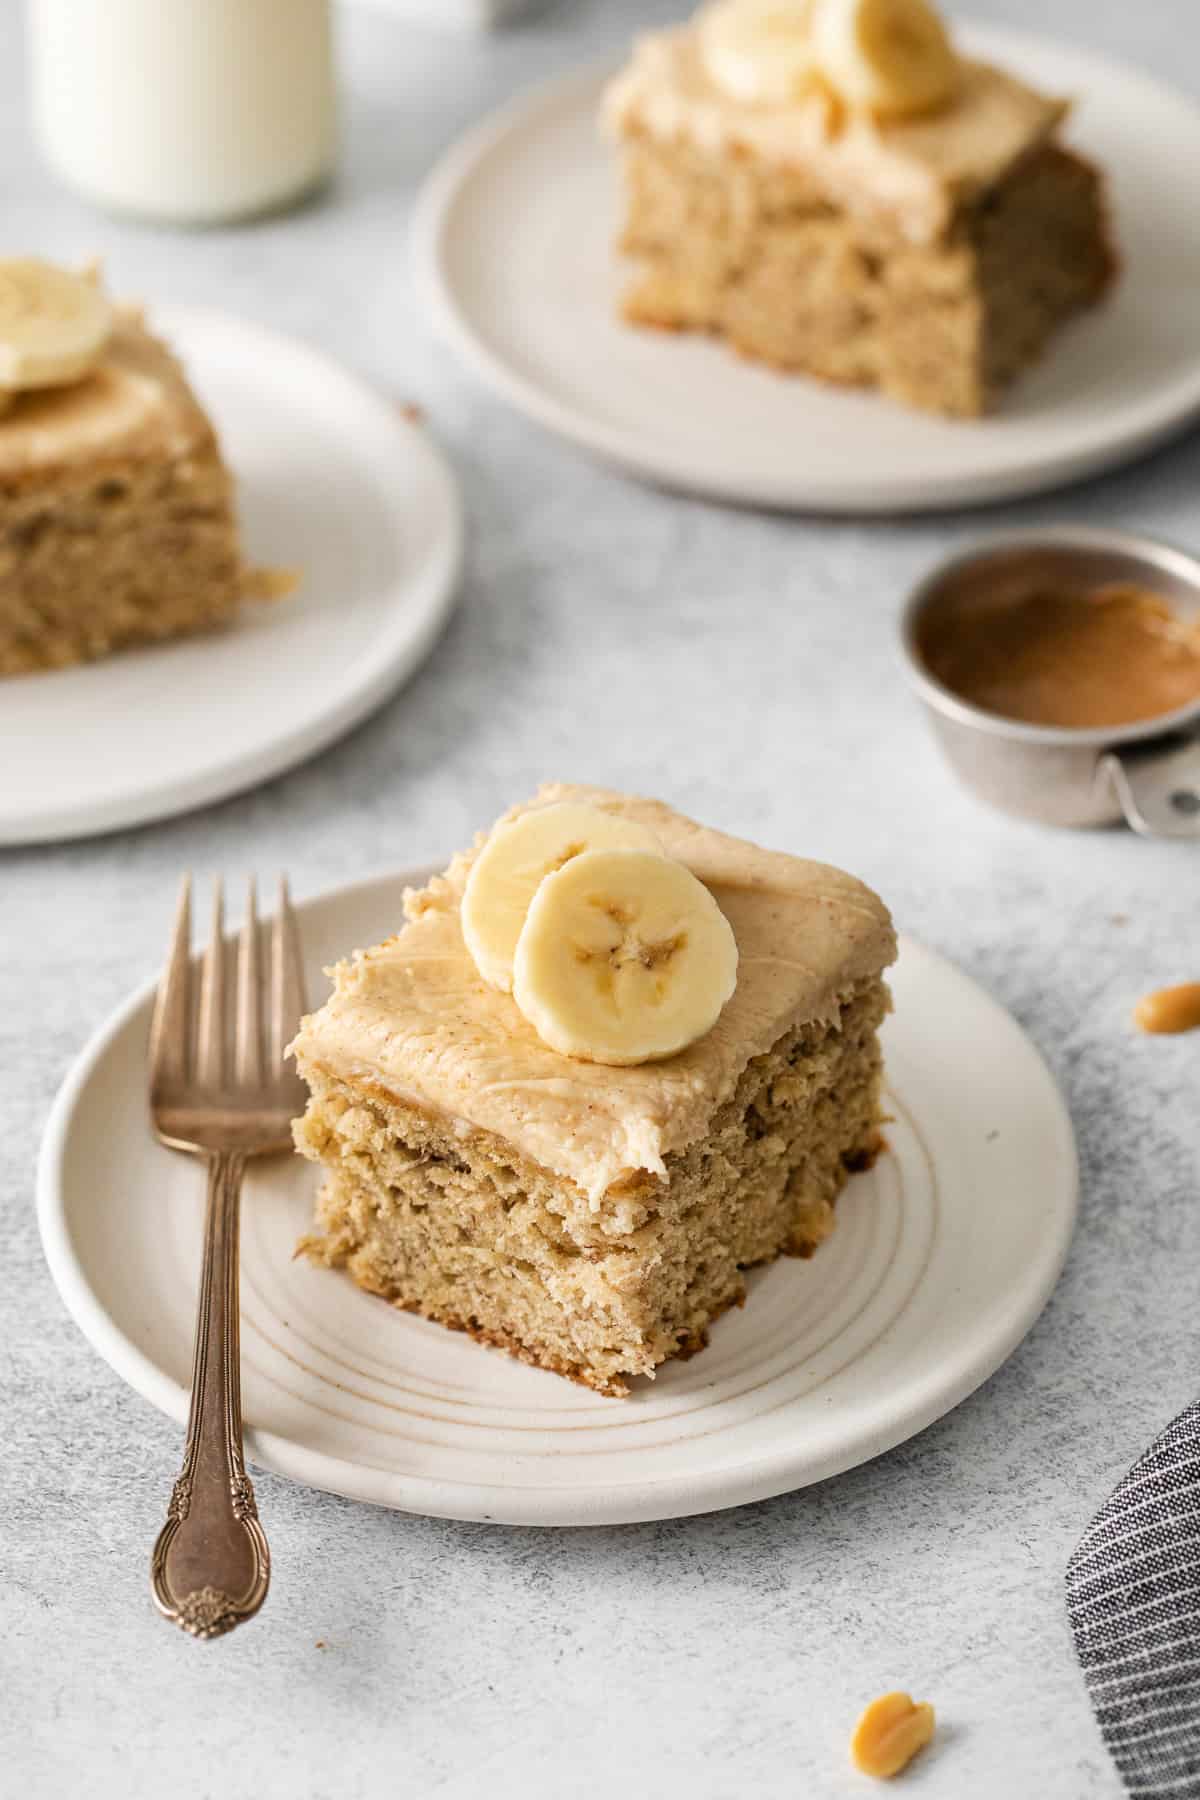 Slice of banana cake with cream cheese frosting on a plate.